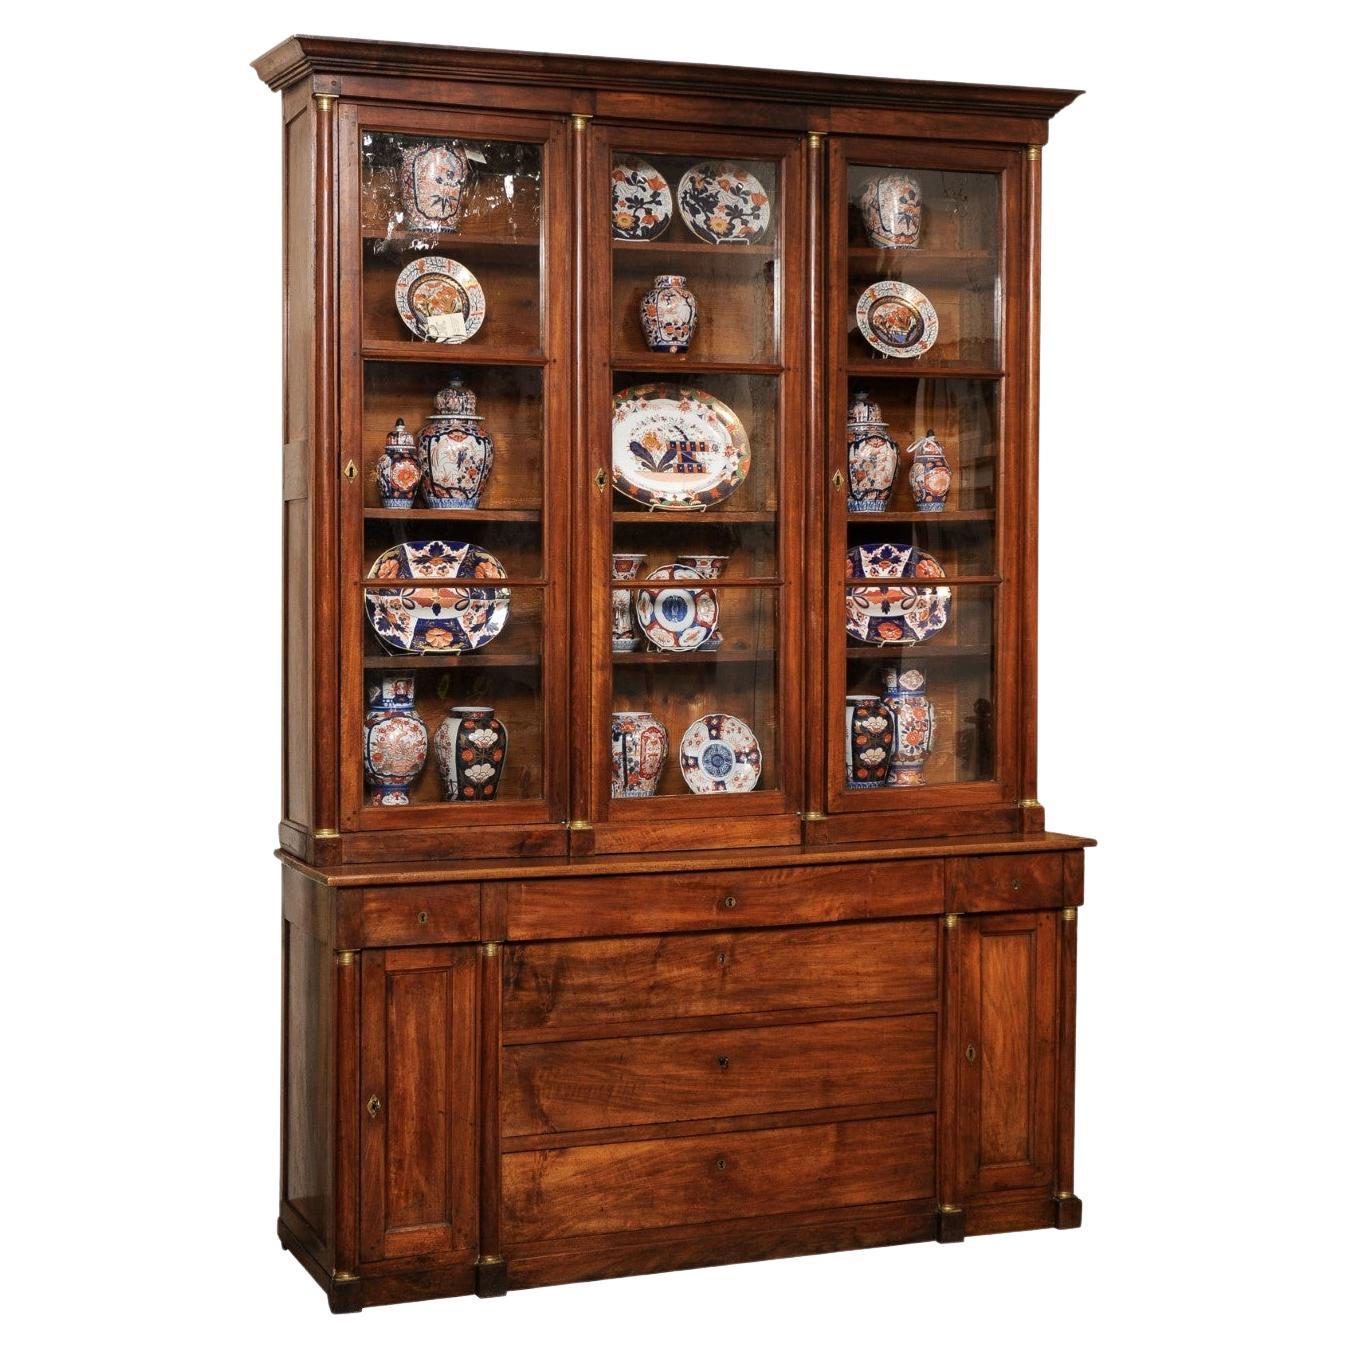 Large 19th Century Italian Walnut Bookcase with Glazed Doors and Center Drawers